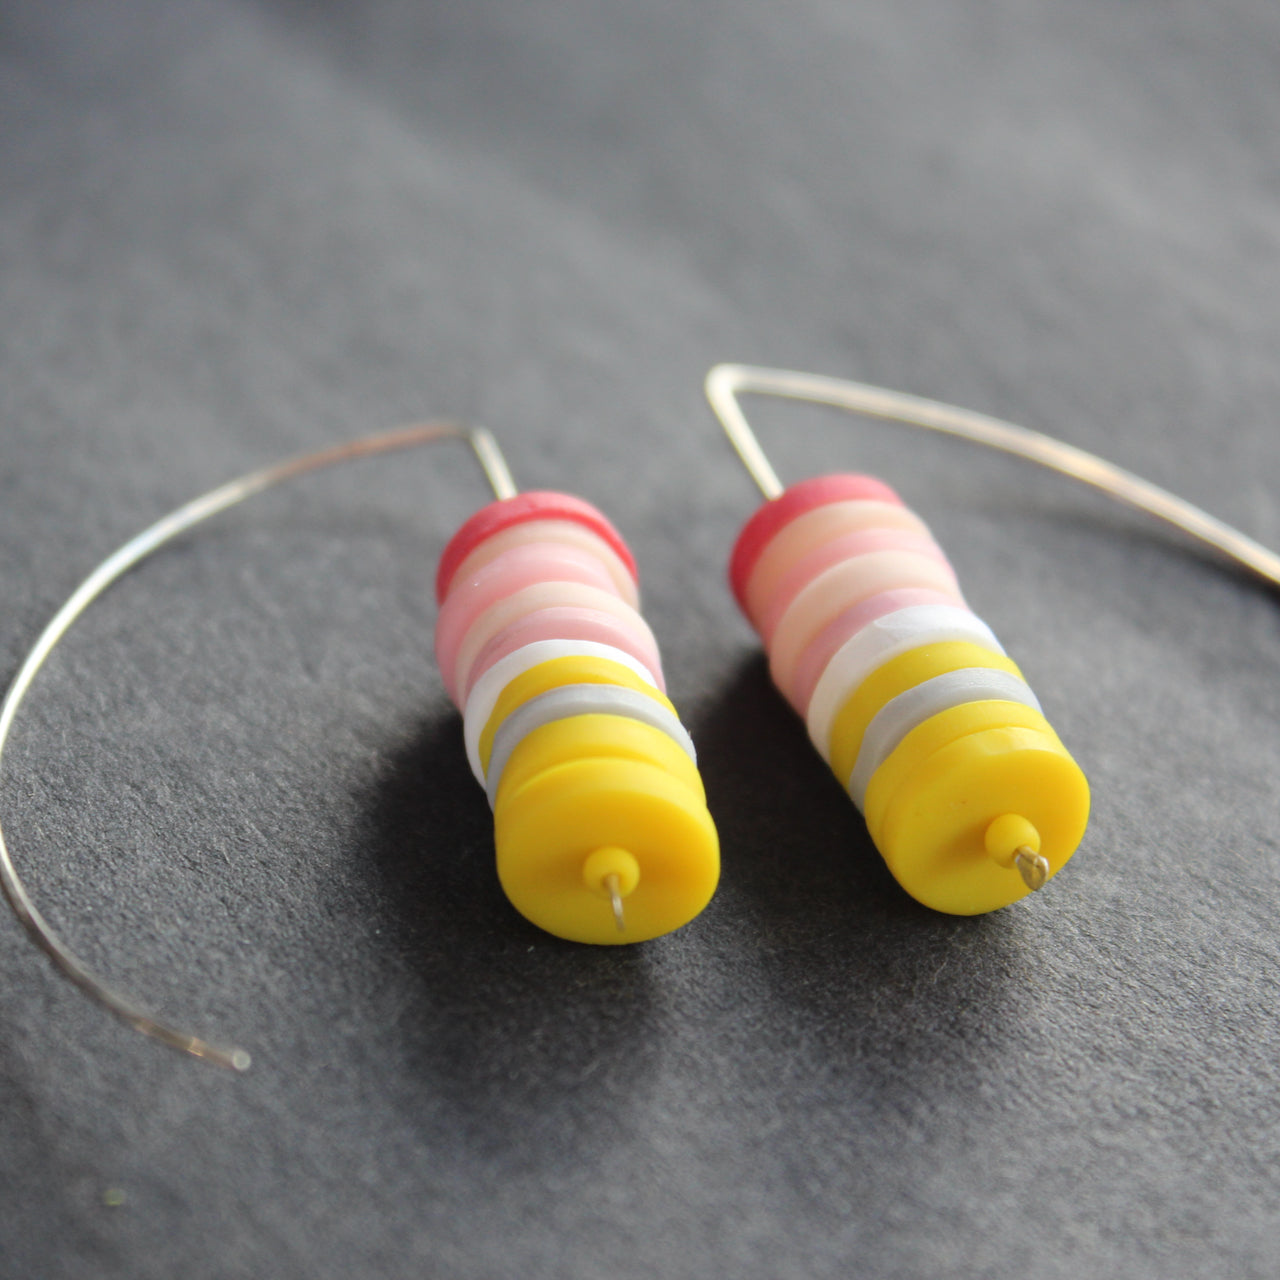 a pair of earrings made of small discs on top of each other in yellow and shades of pink by jewellery designer Clare Lloyd 